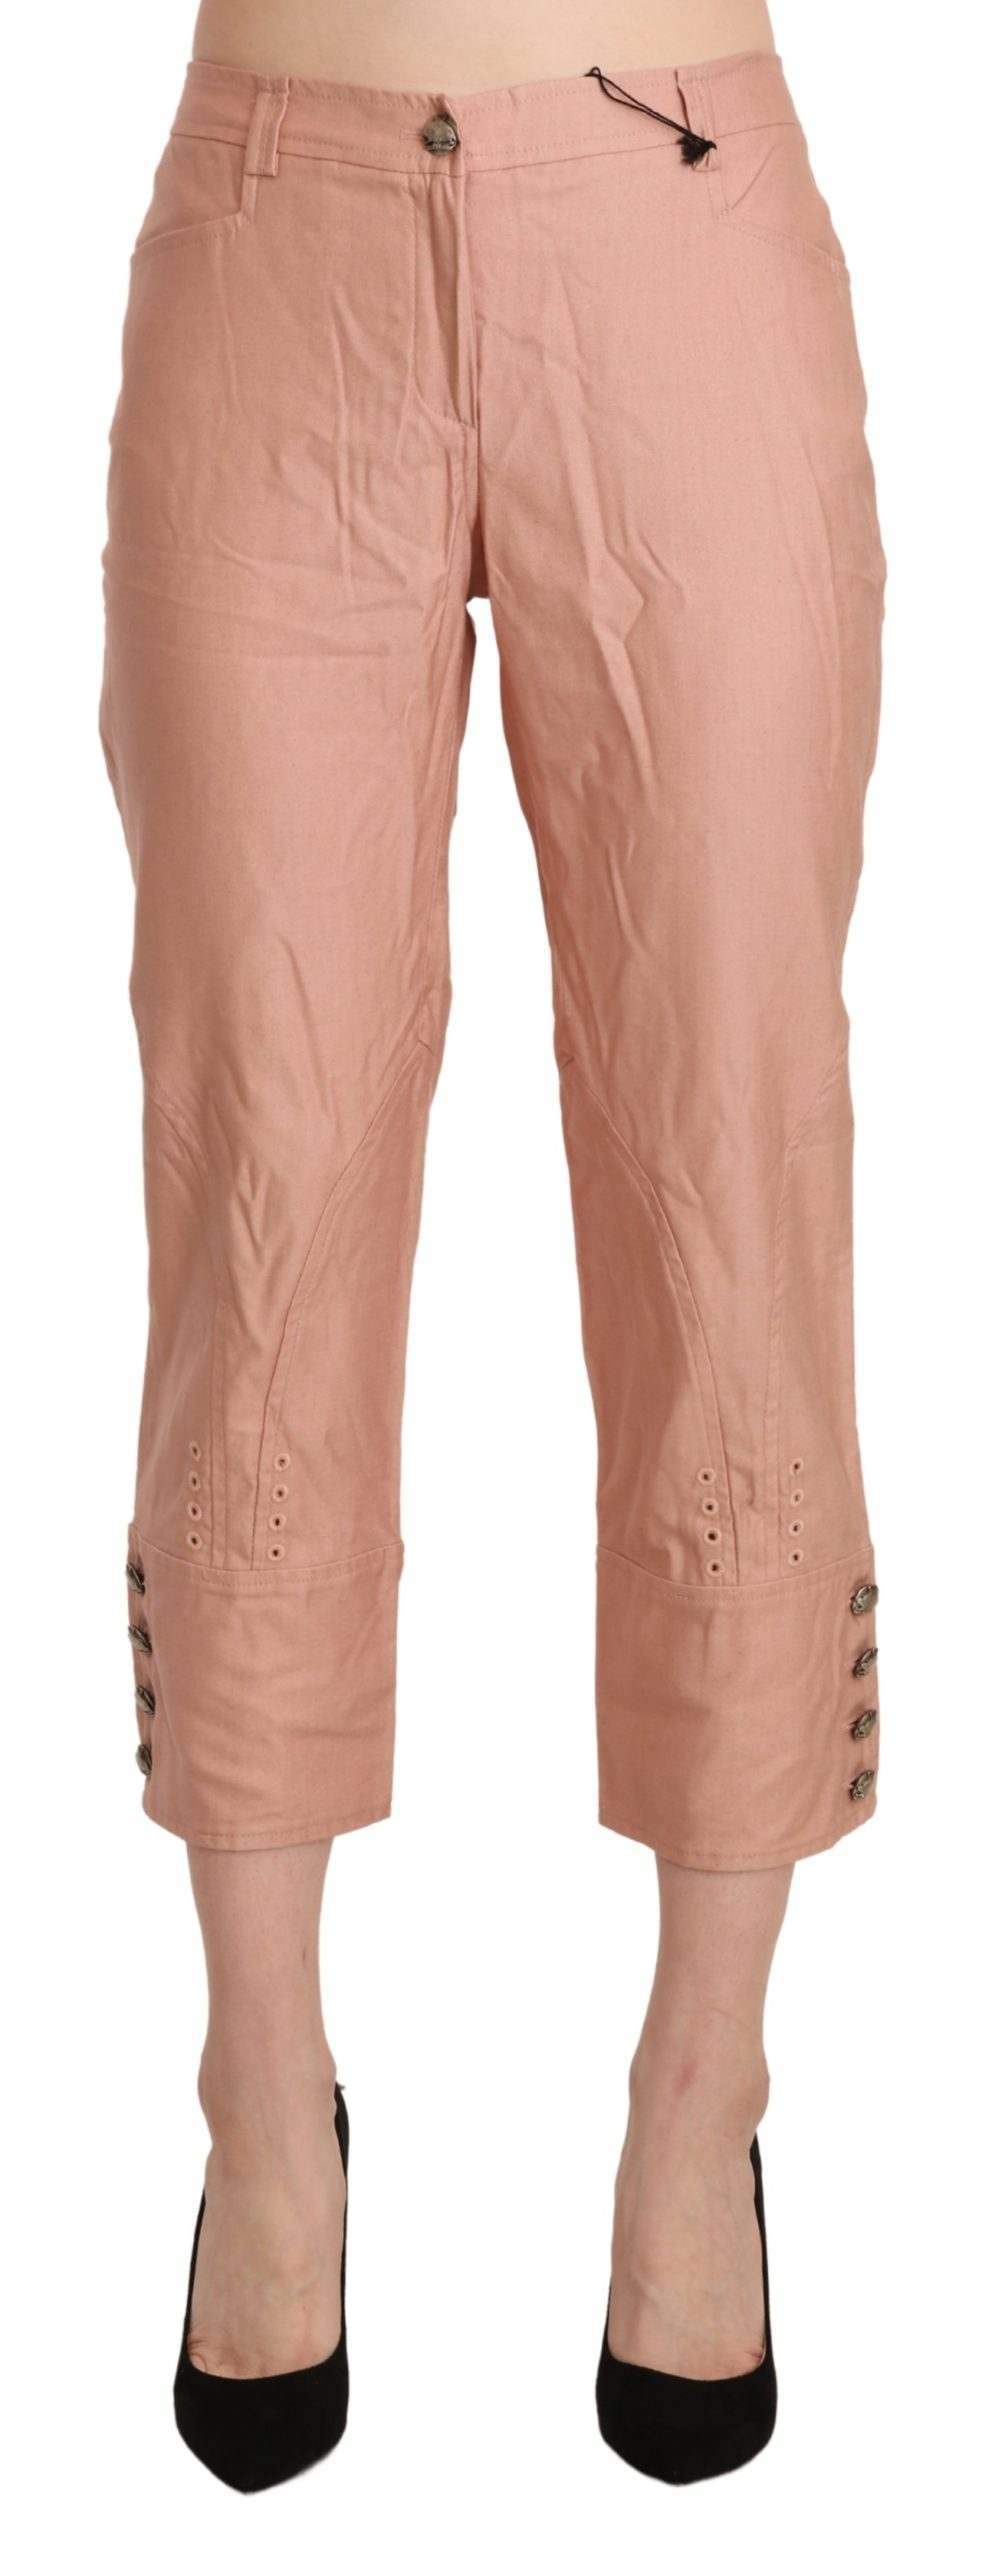 Ermanno Scervino Cotton Pink High Waist Cropped Trouser Pants #women, Ermanno Scervino, feed-agegroup-adult, feed-color-pink, feed-gender-female, feed-size-IT44|L, feed-size-IT46|XL, Gender_Women, IT44|L, IT46|XL, Jeans & Pants - Women - Clothing, Pink, Women - New Arrivals at SEYMAYKA